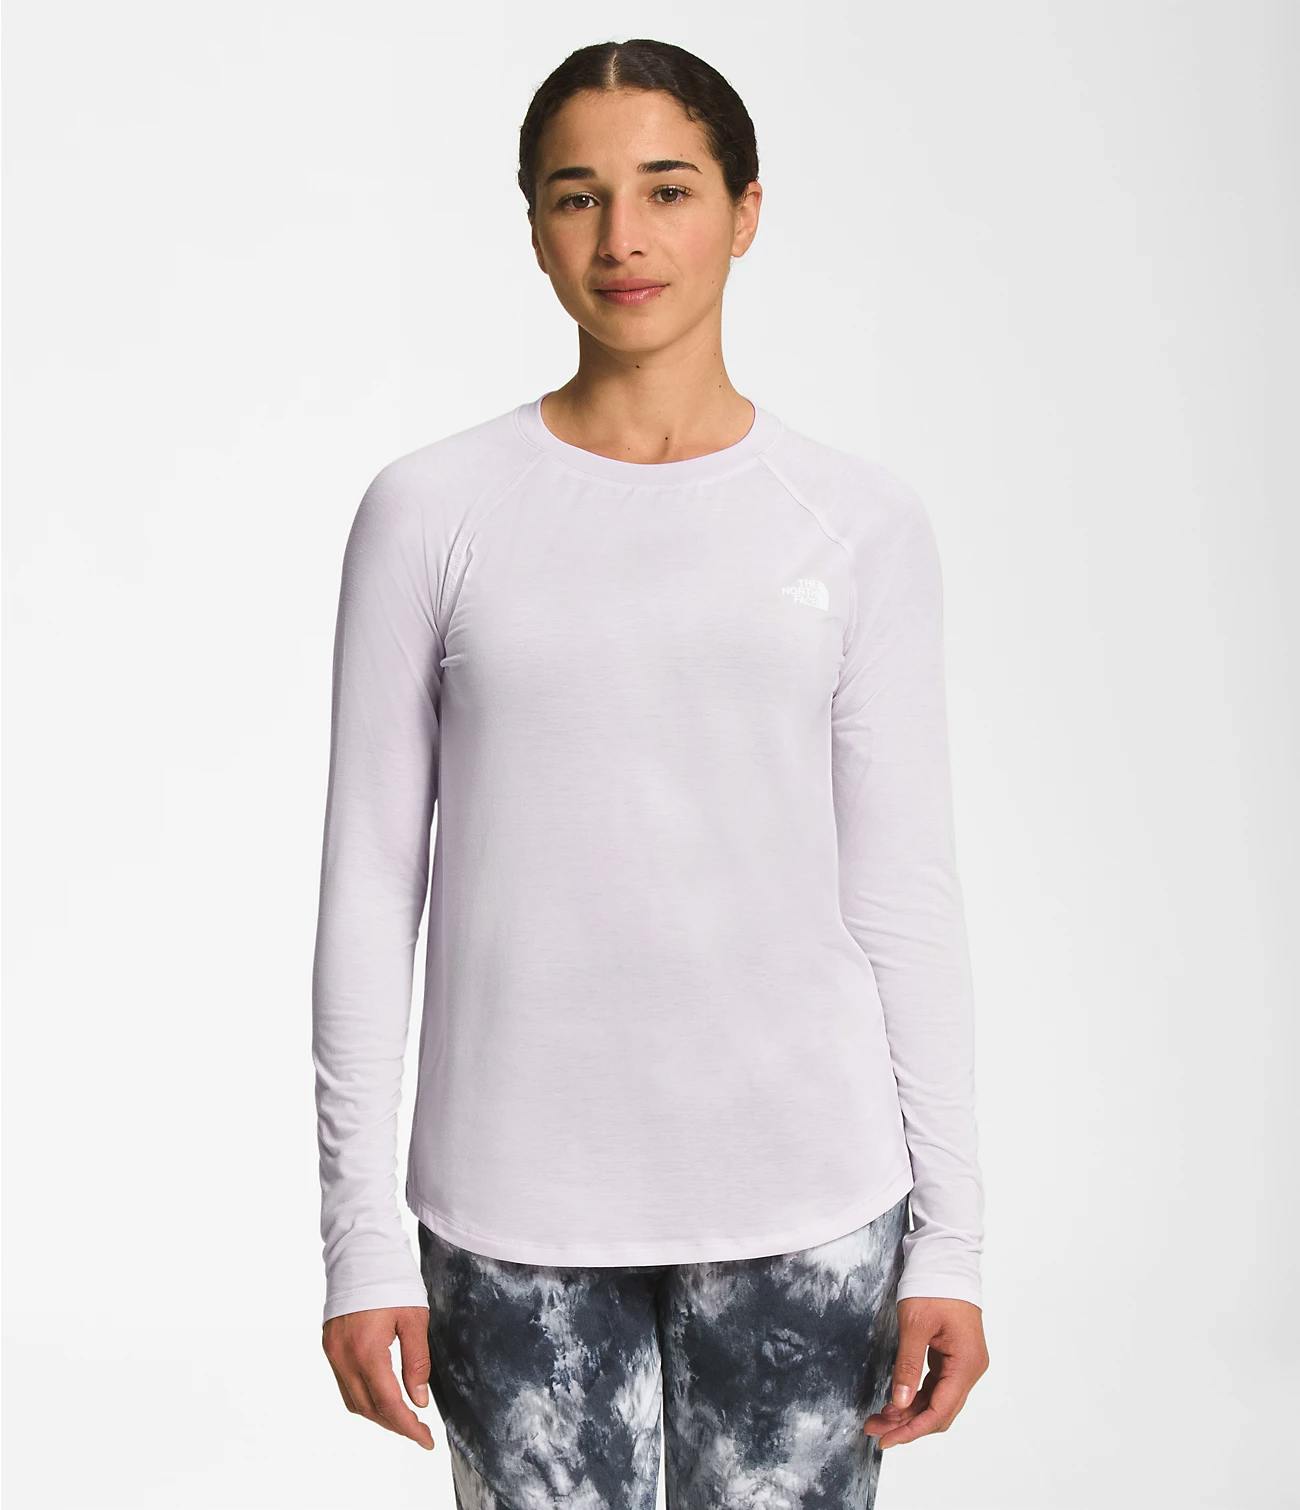 The North Face Women's Wander Hi-Low Long Sleeve